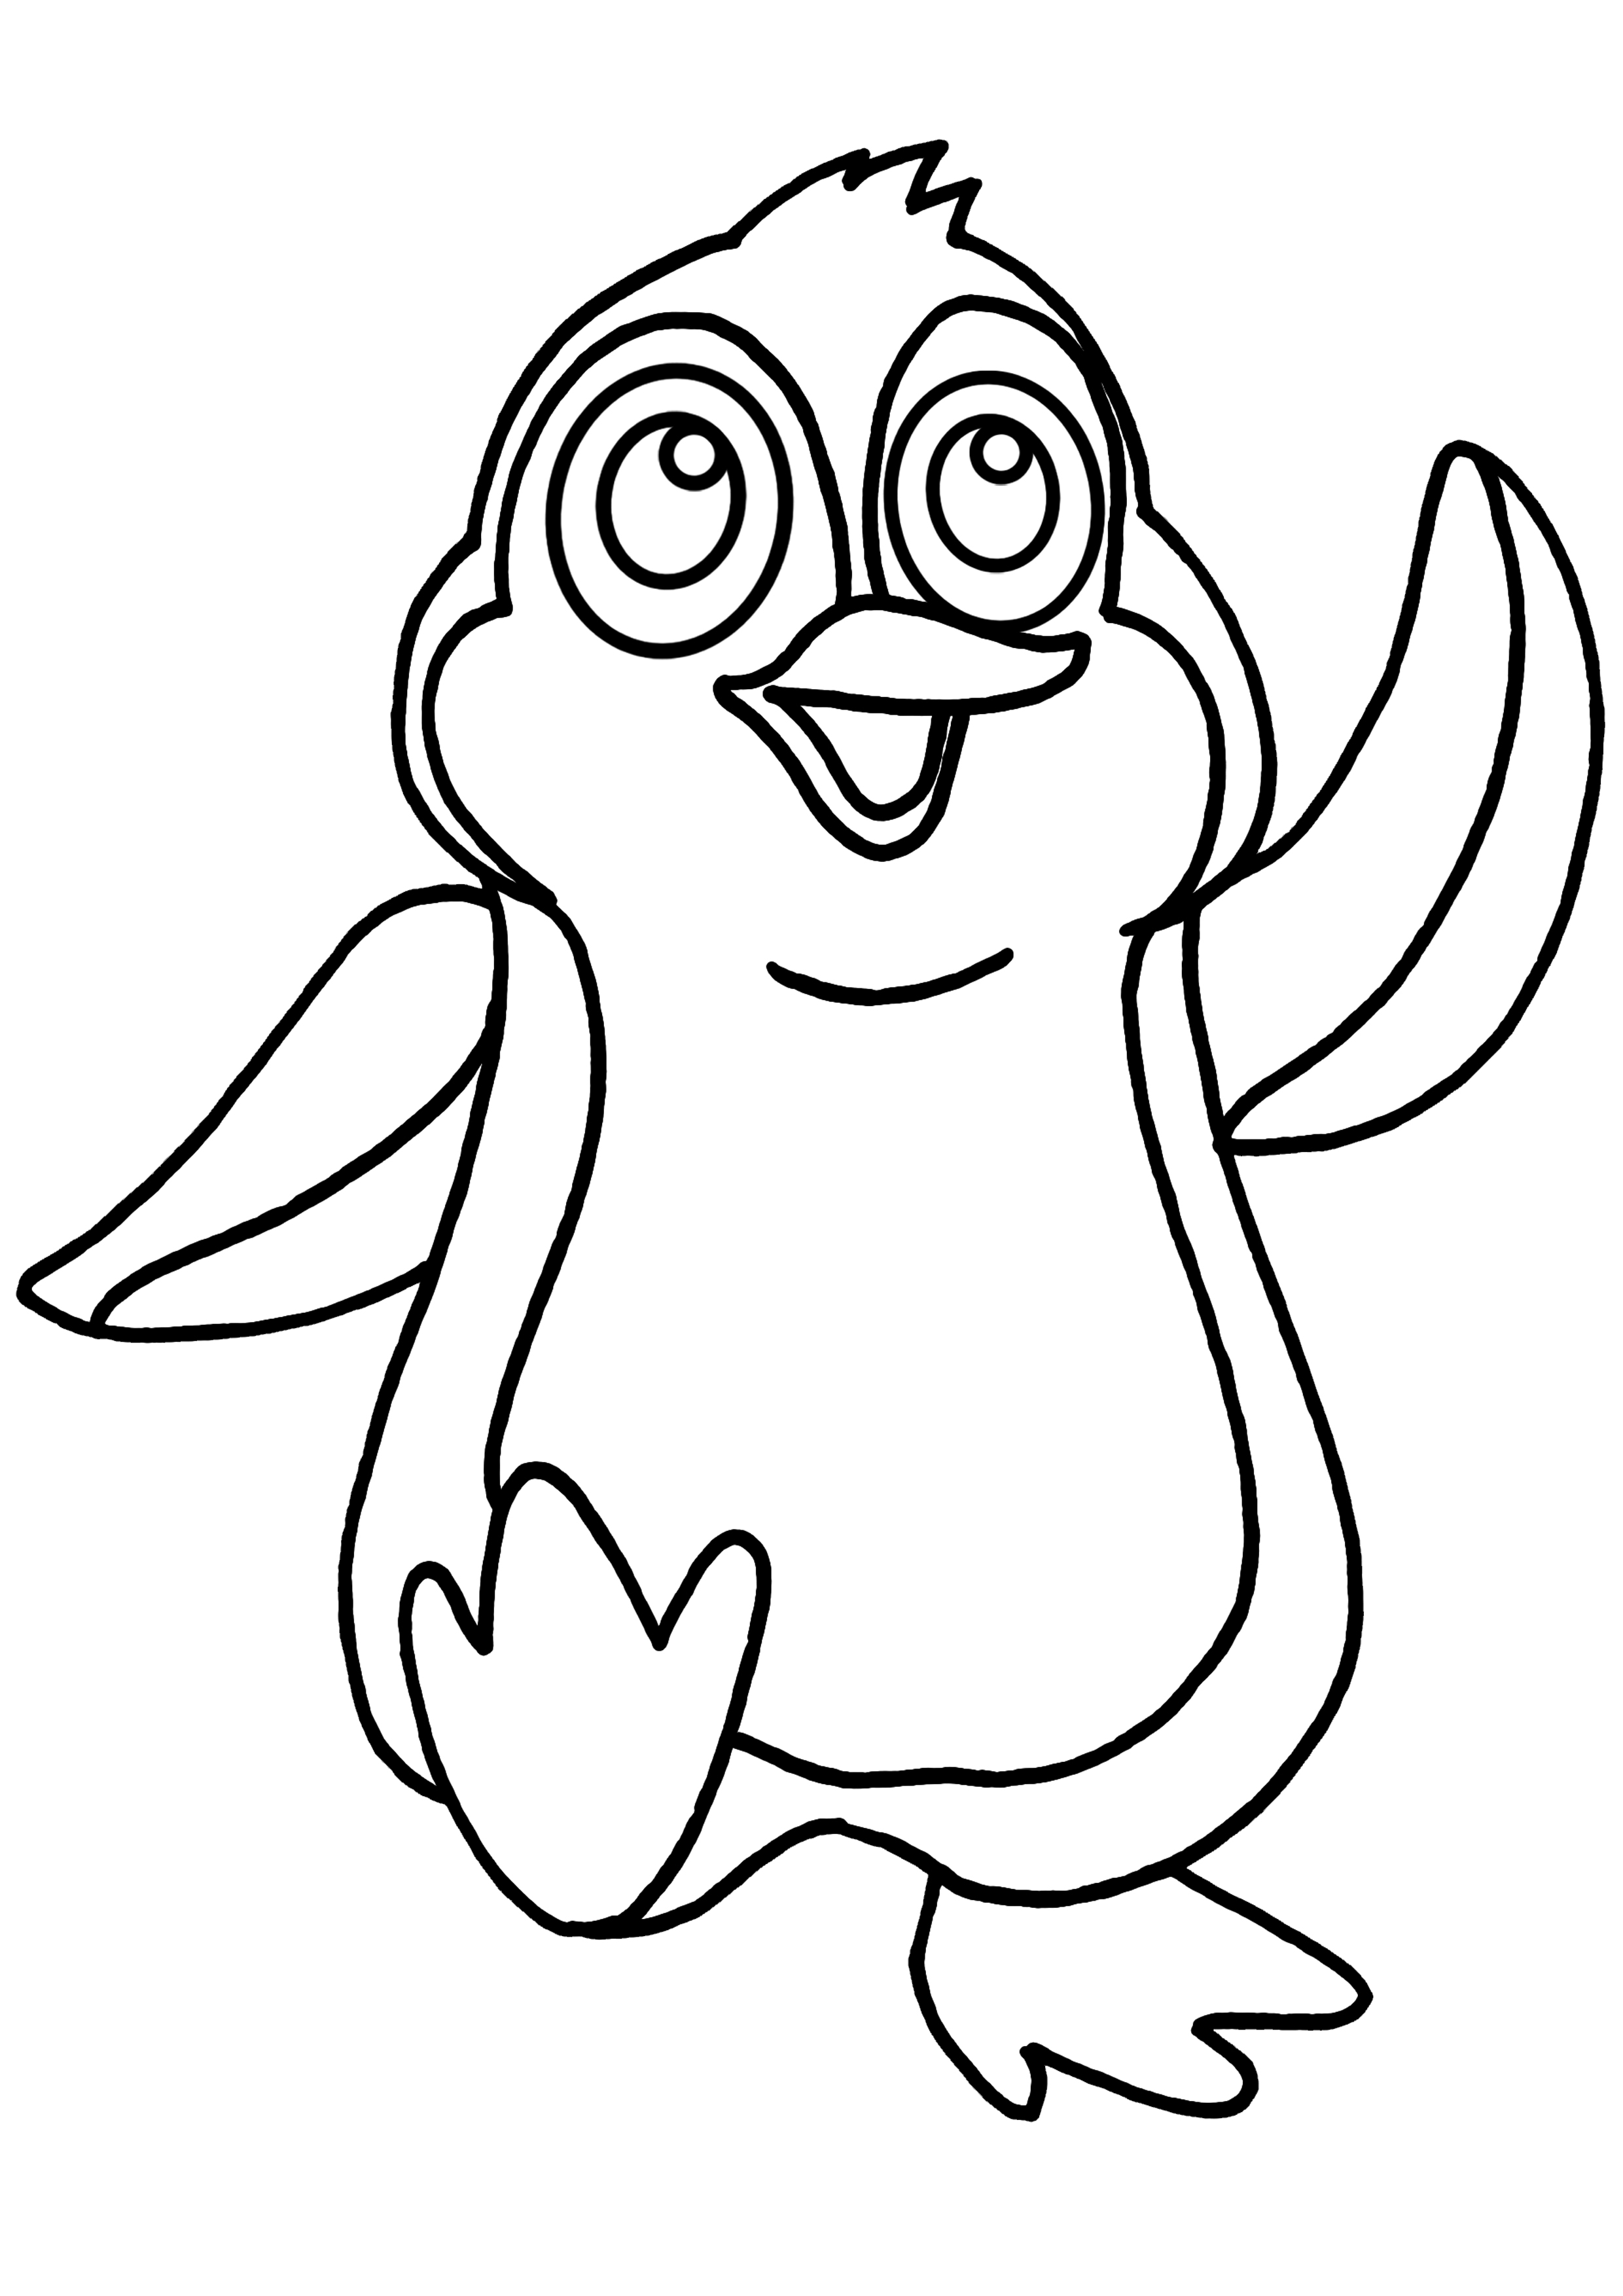 Penguin Coloring Pages Printable - Printable World Holiday